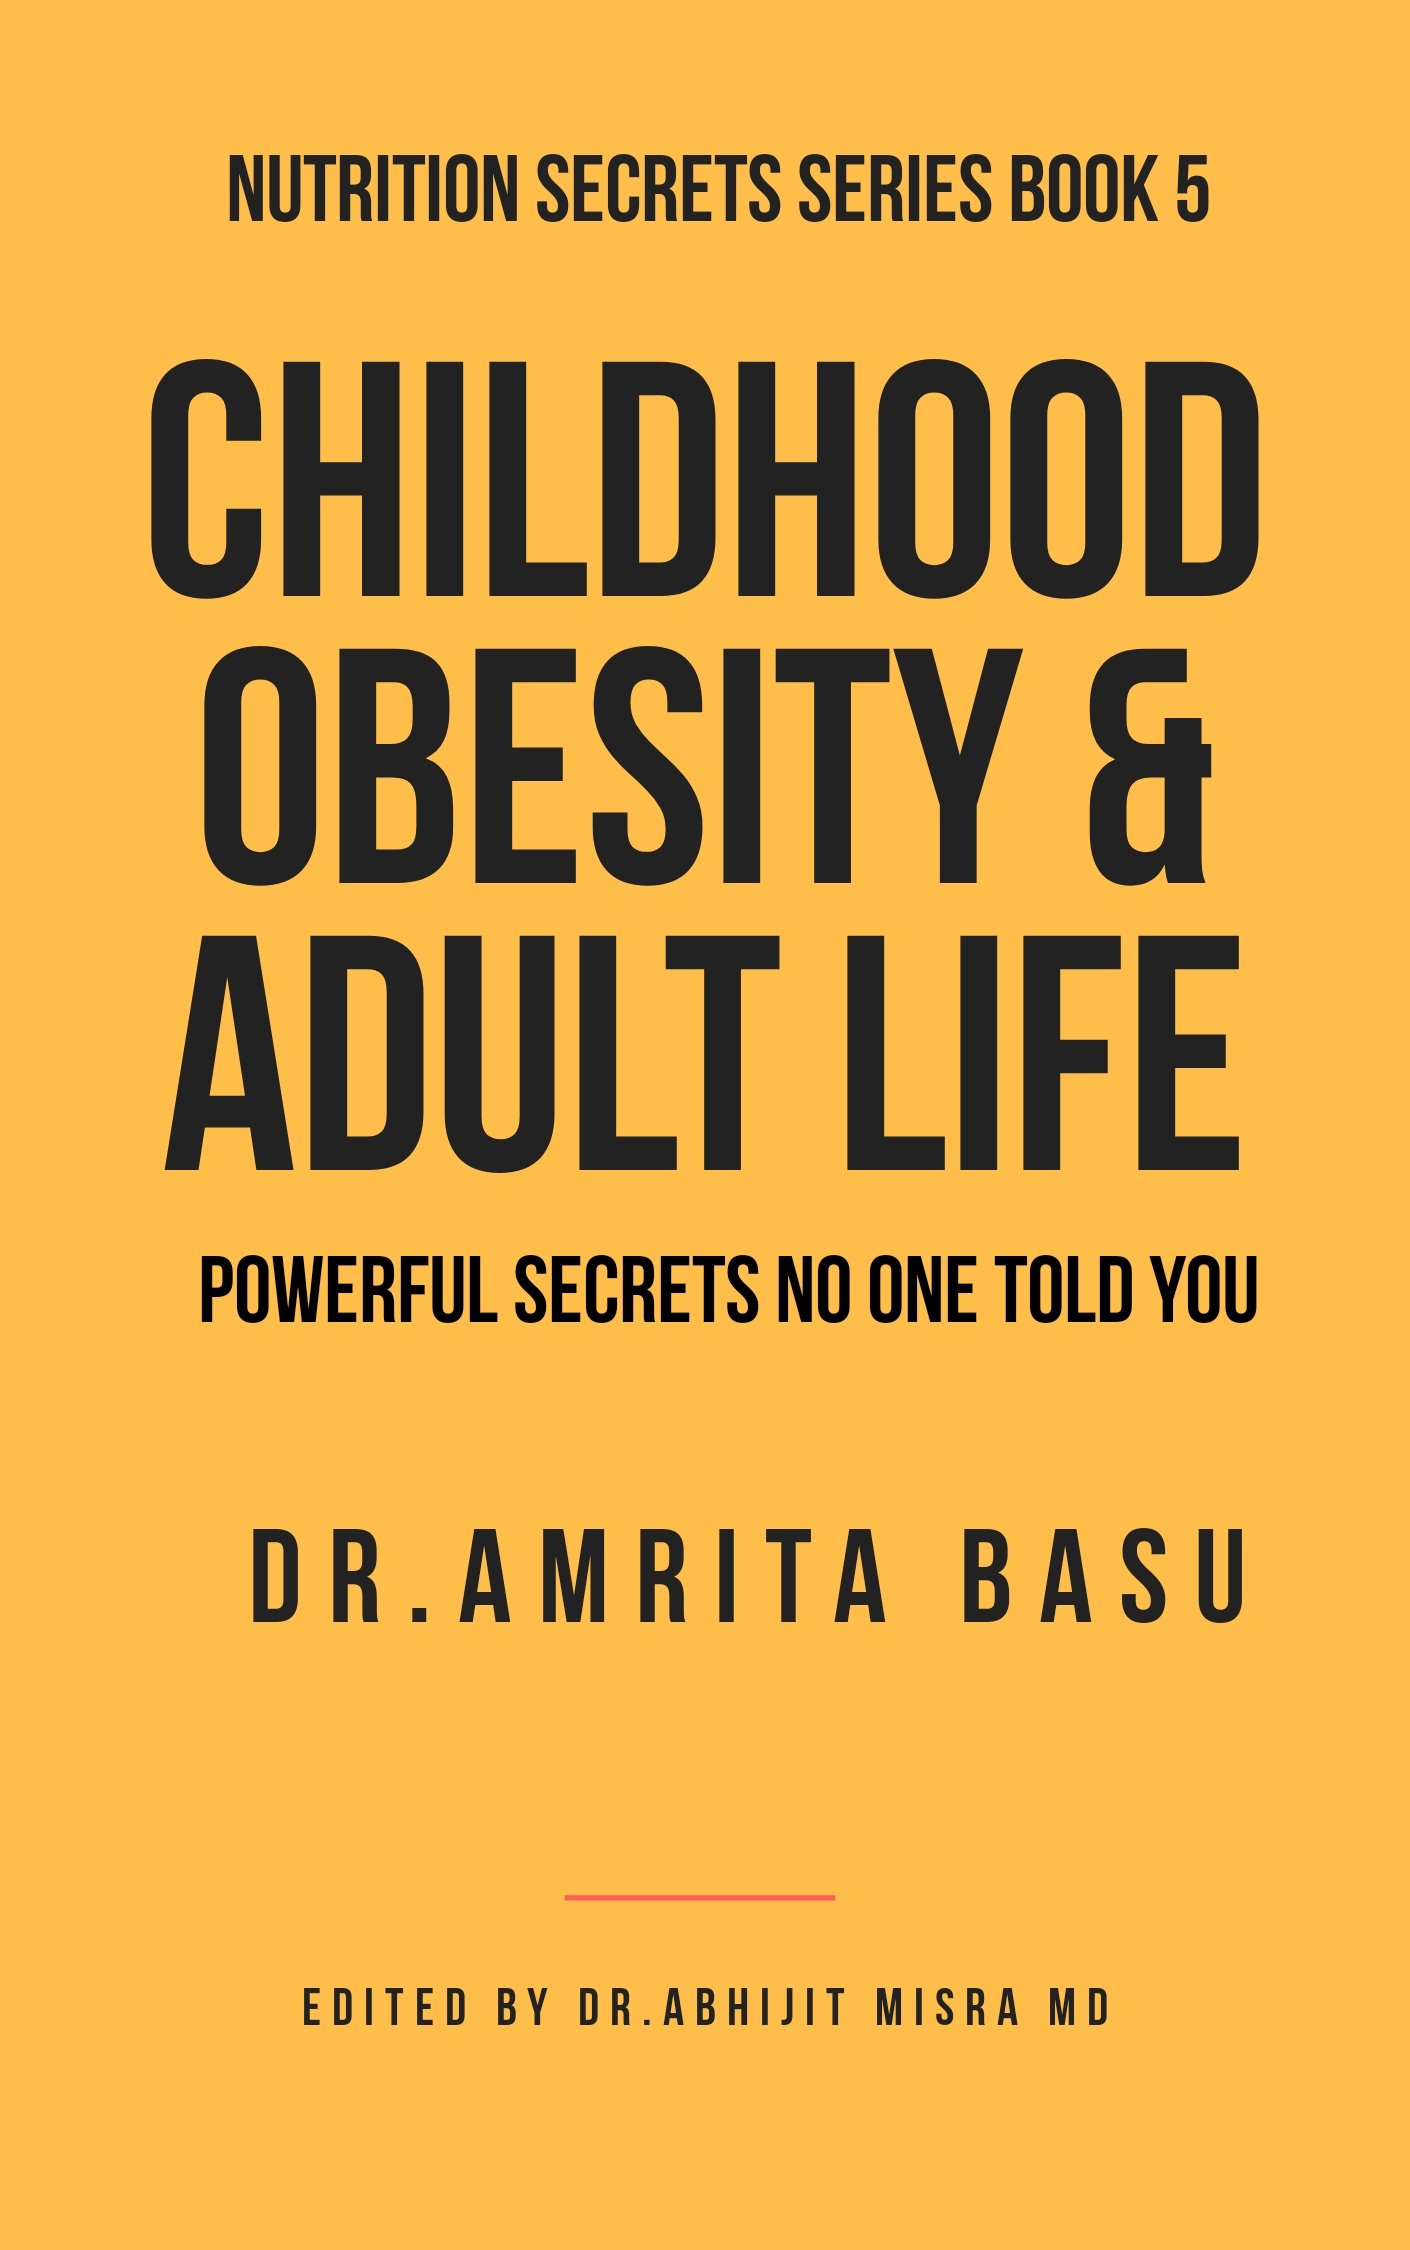 CHILDHOOD OBESITY & ADULT LIFE: Powerful Secrets No One Told You (Nutrition Secrets Book 5)